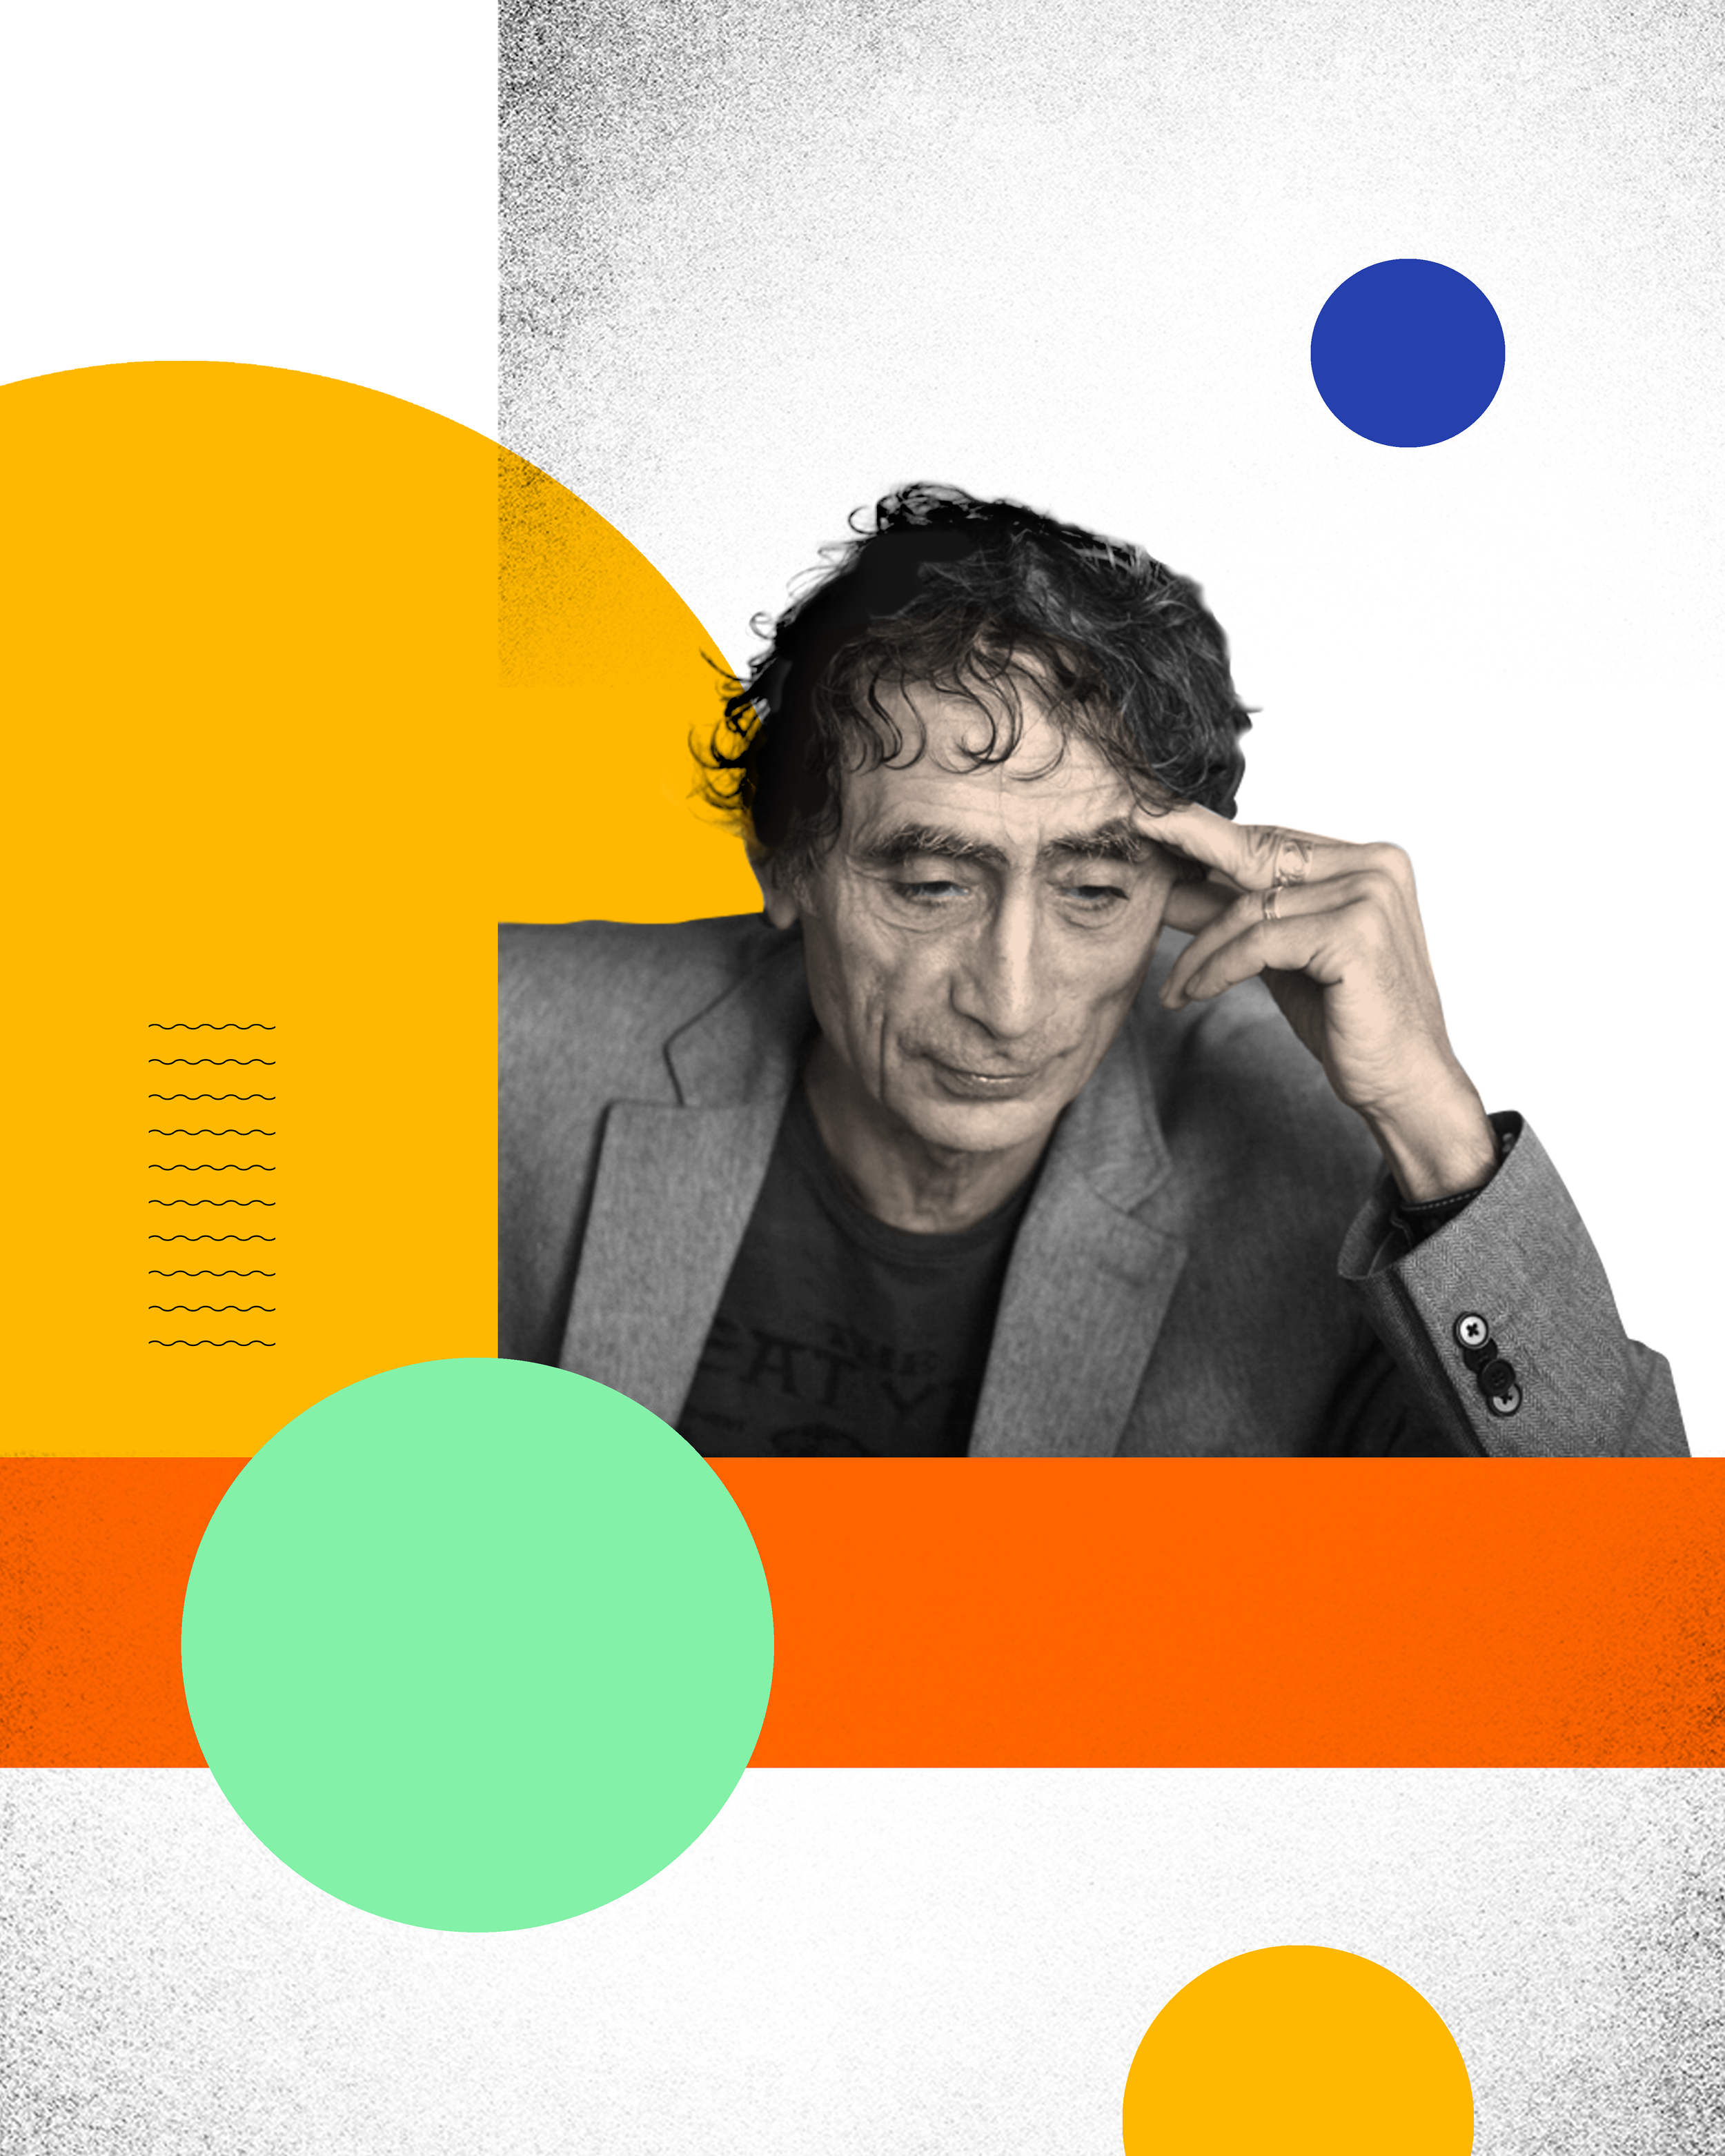 Gabor Maté on Covid-19 for Penguin Perspectives